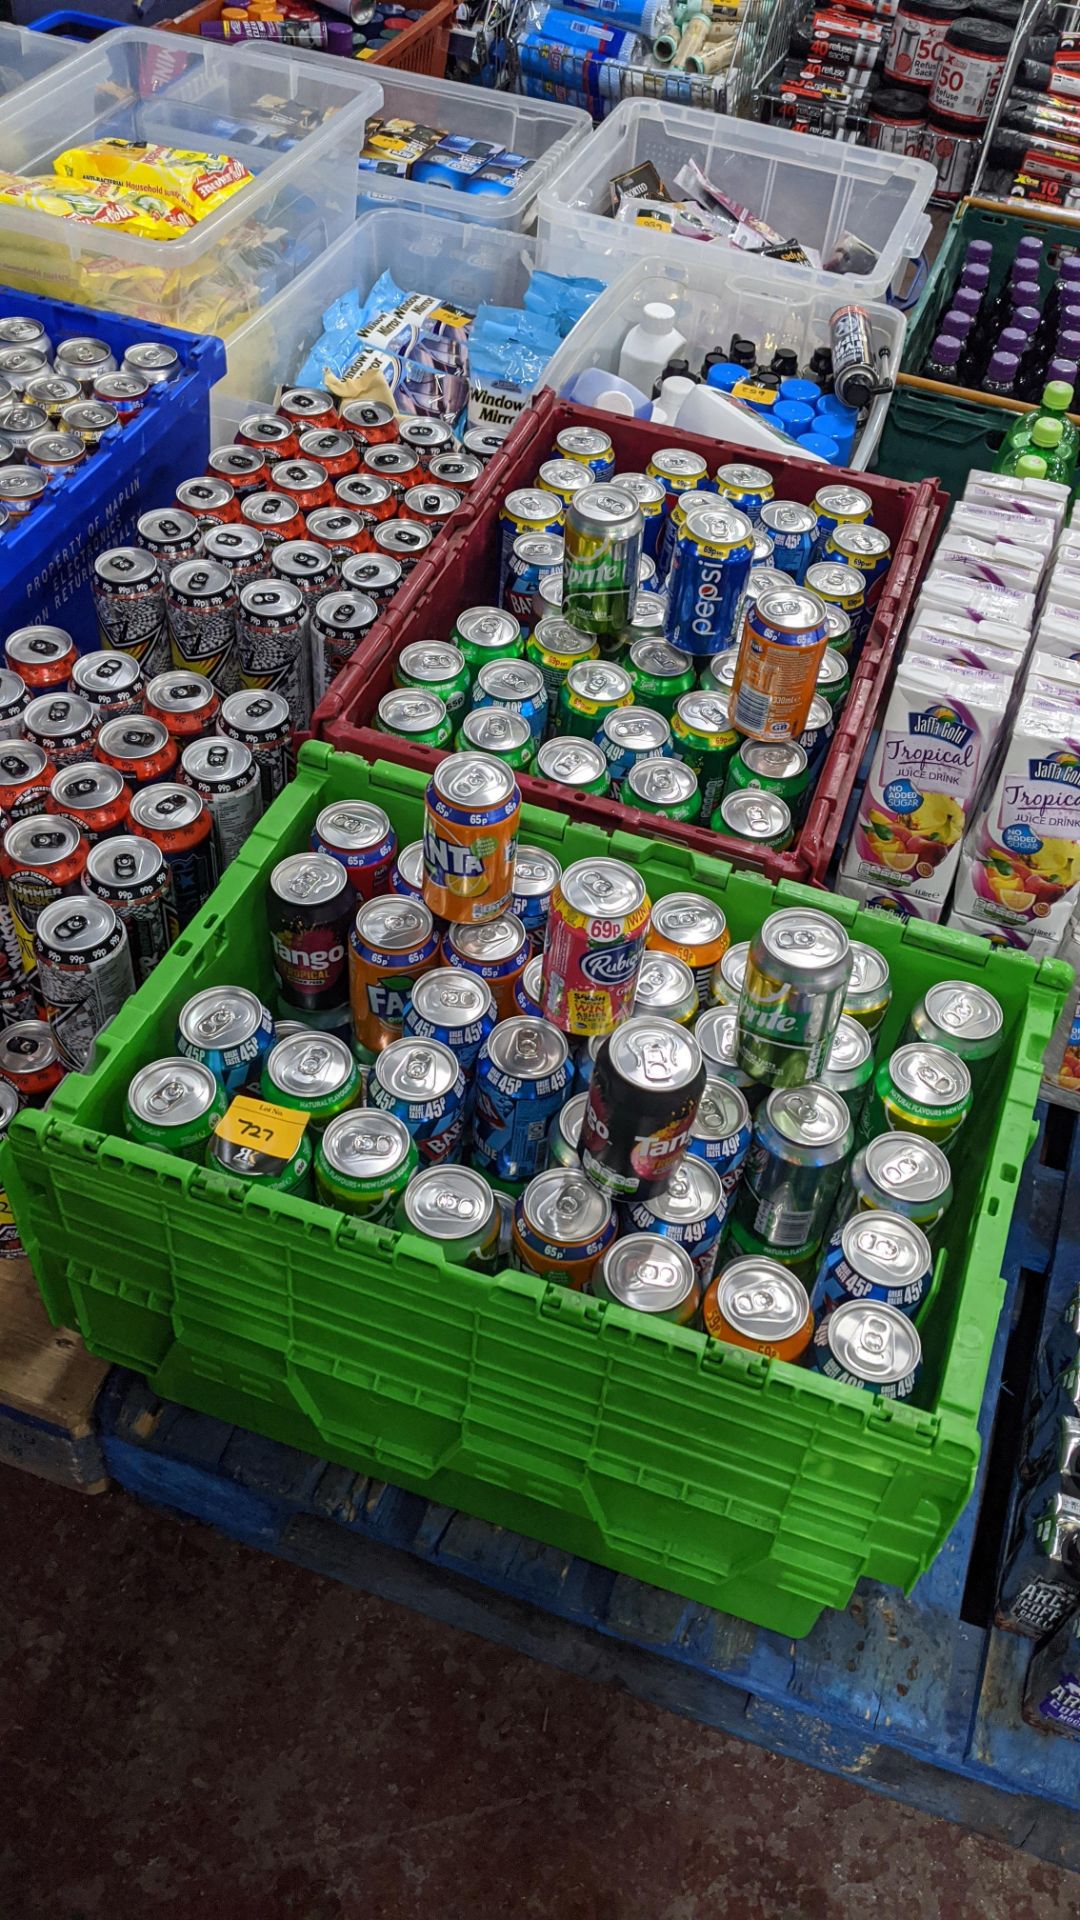 Contents of 2 crates of assorted cans of soft drink including Tango, Sprite, Pepsi & more - crate